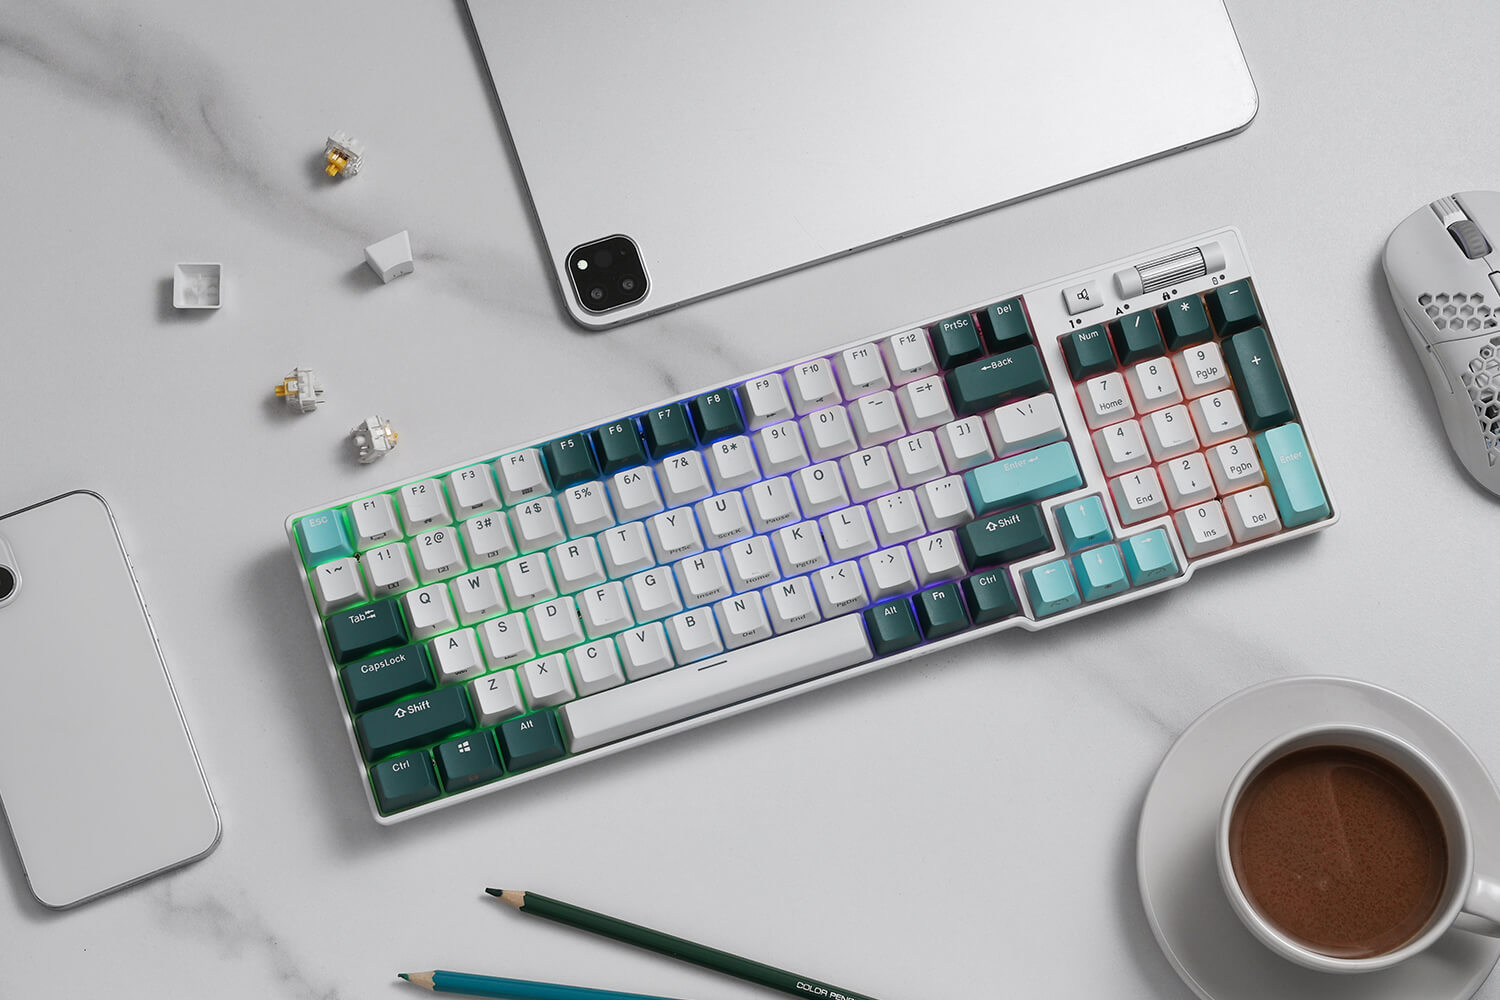 hot swappable mechanical keyboard